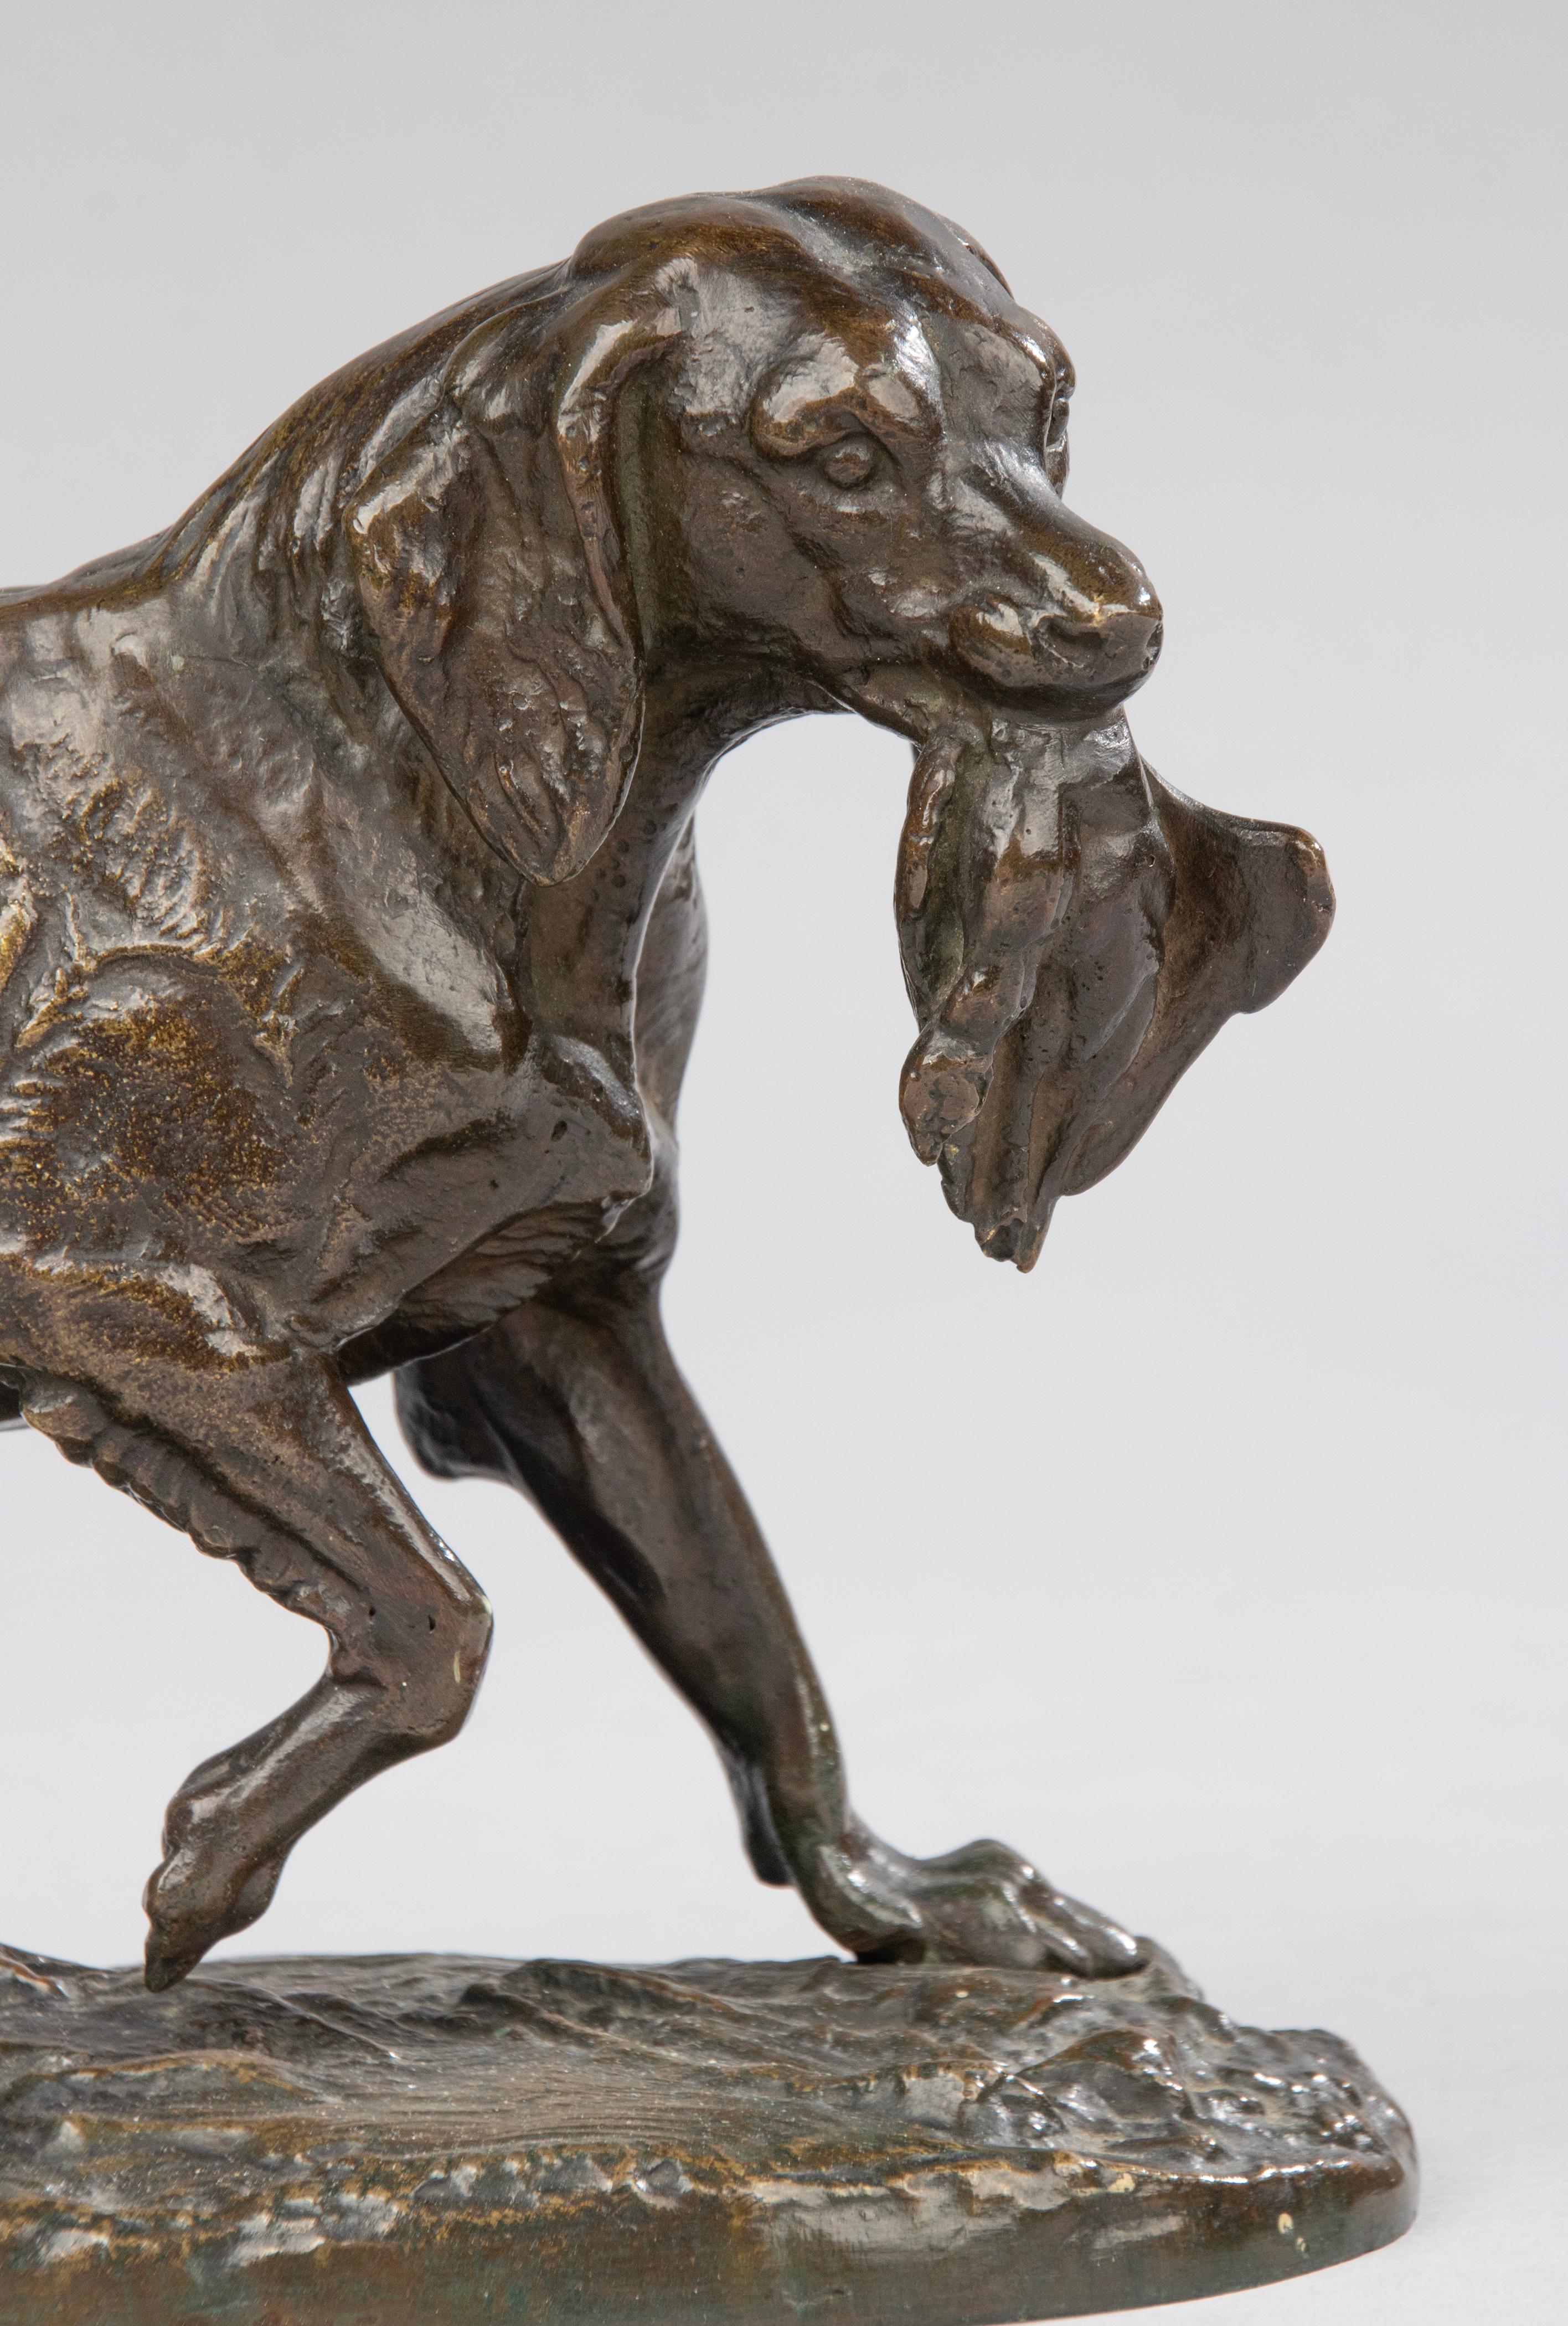 A fine bronze casted sculpture of French Setter dog. The bronze has the original olive-brown patina. It is made in France, circa 1890-1900. Not signed, maker unknown. The sculpture has a beautiful patina and is in good condition.